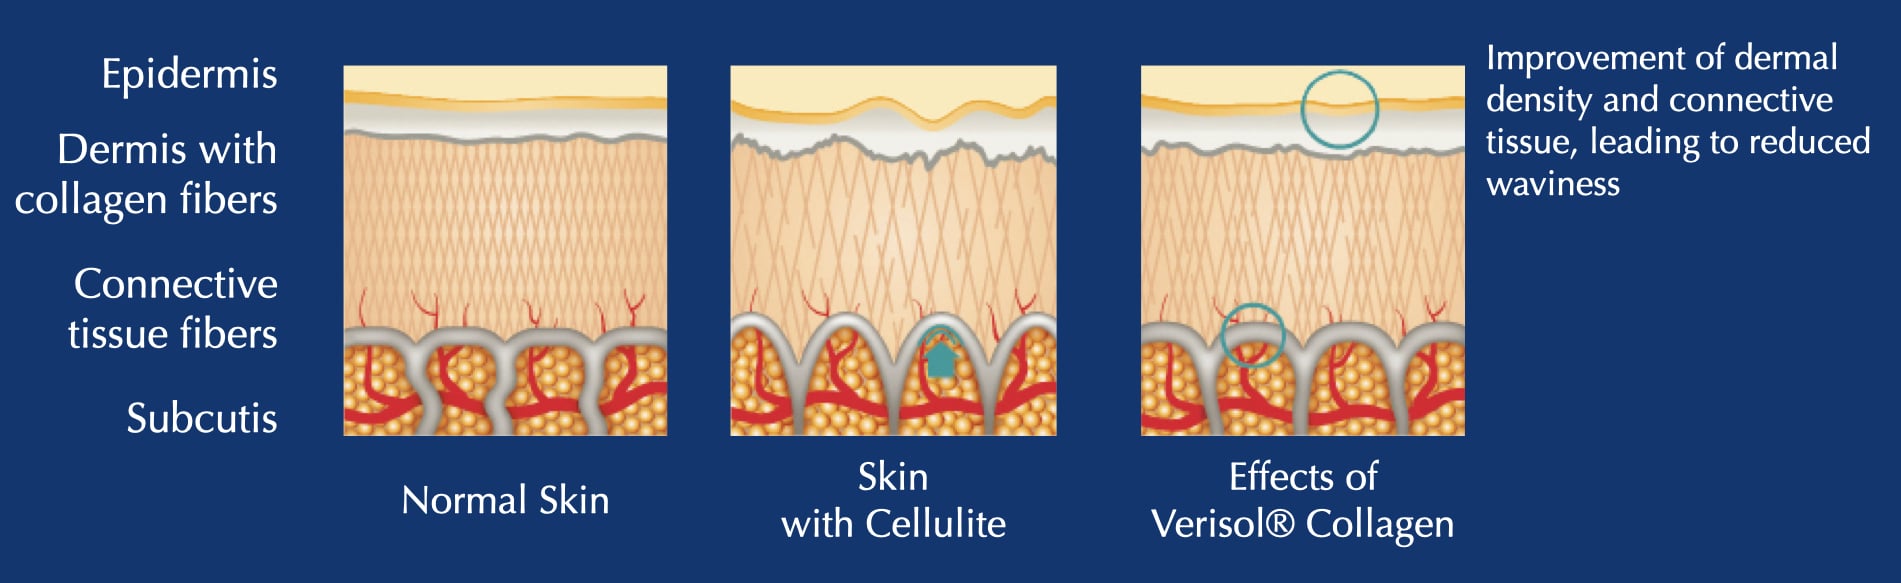 Reduced waviness of the skin surface profile